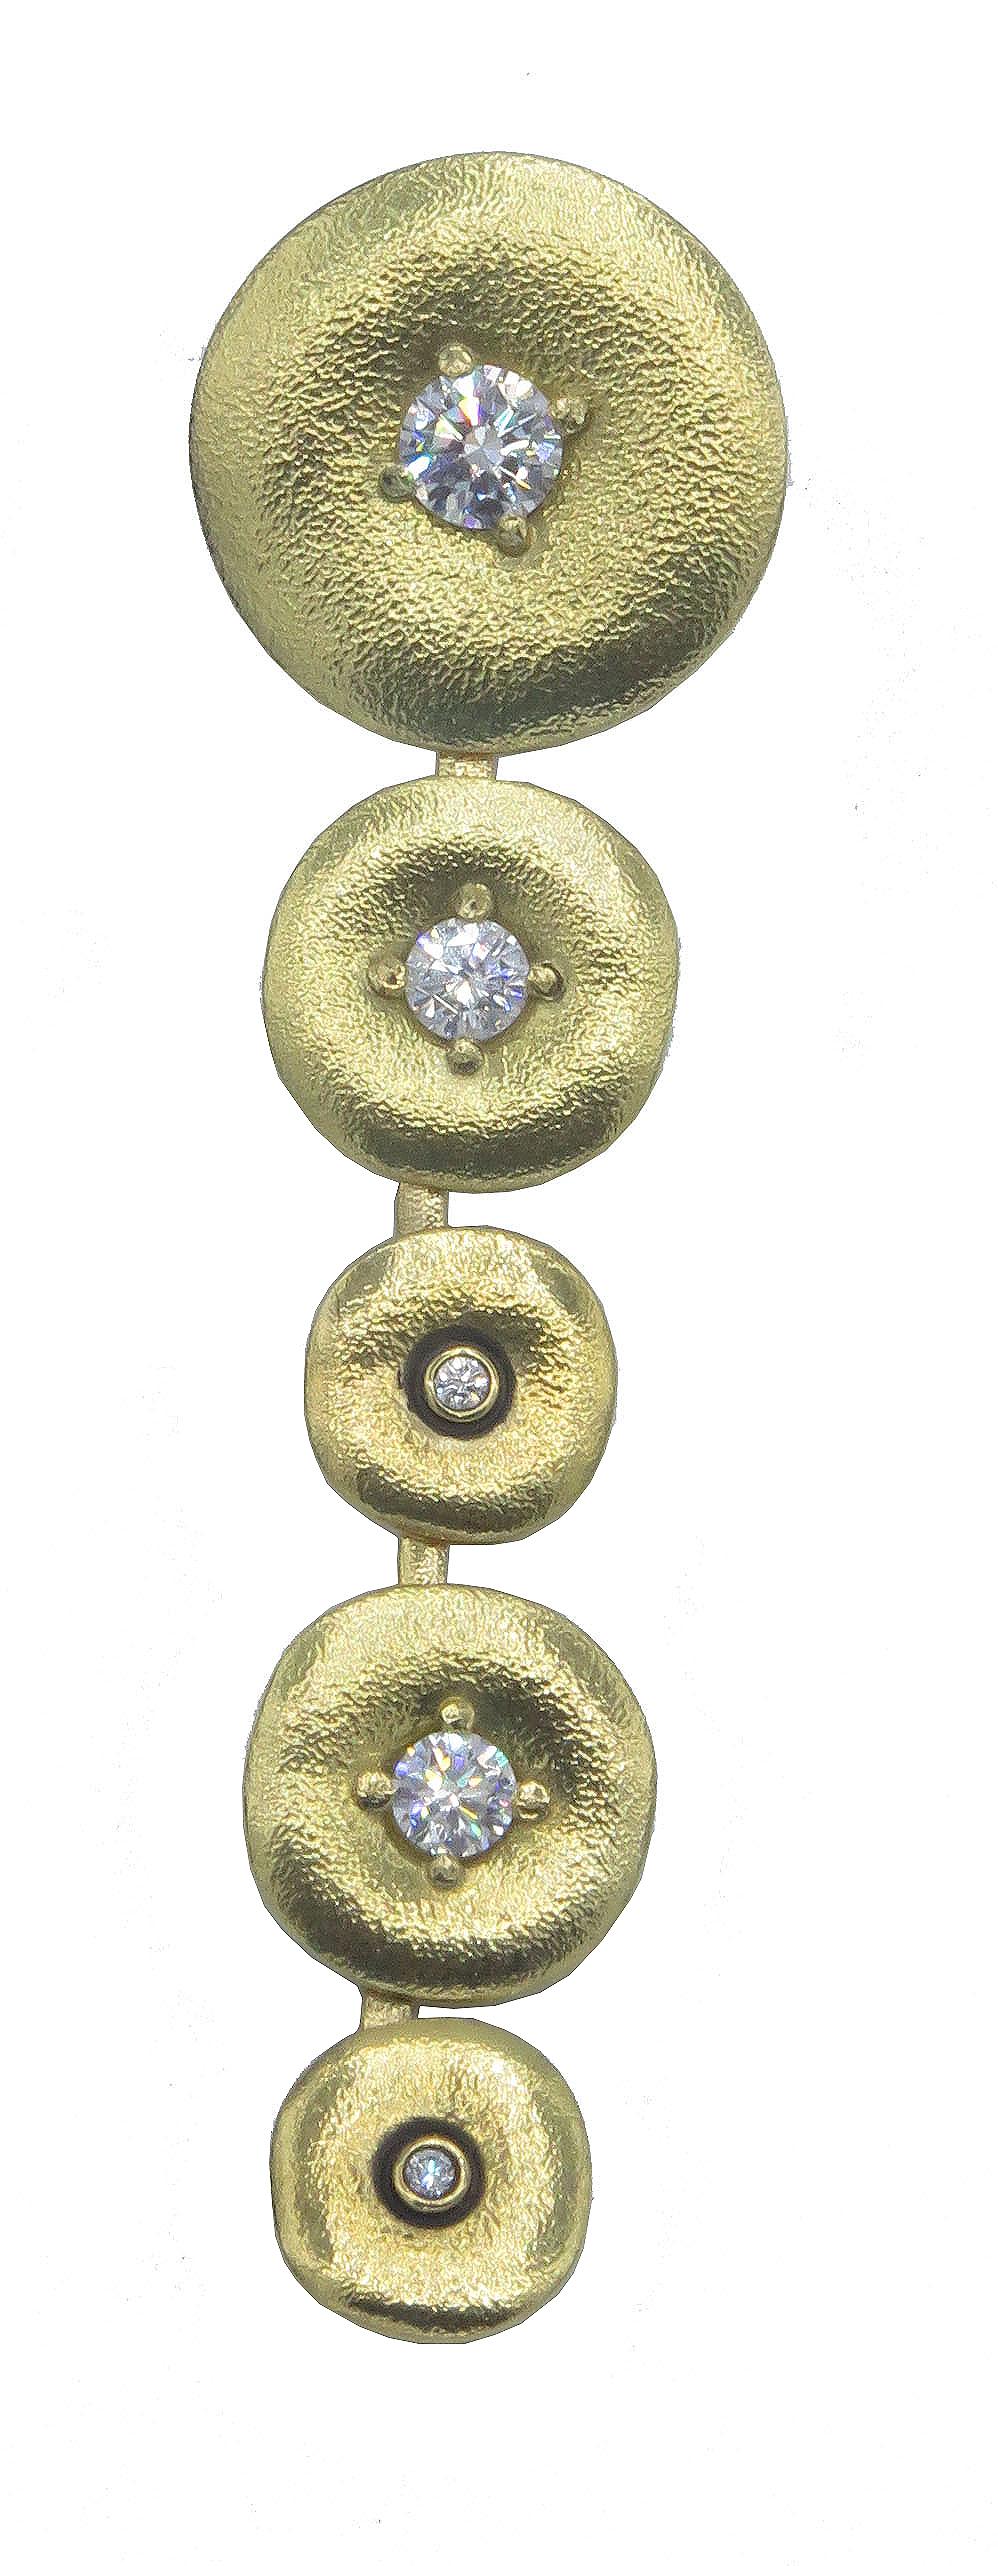 Beautiful and rare yellow gold and diamond earrings were created by famed jewelry designer Alex Sepkus only two pairs of these earrings are known to have been made, they contain 1.12 carats of sparkling diamonds, set in brushed yellow gold. These